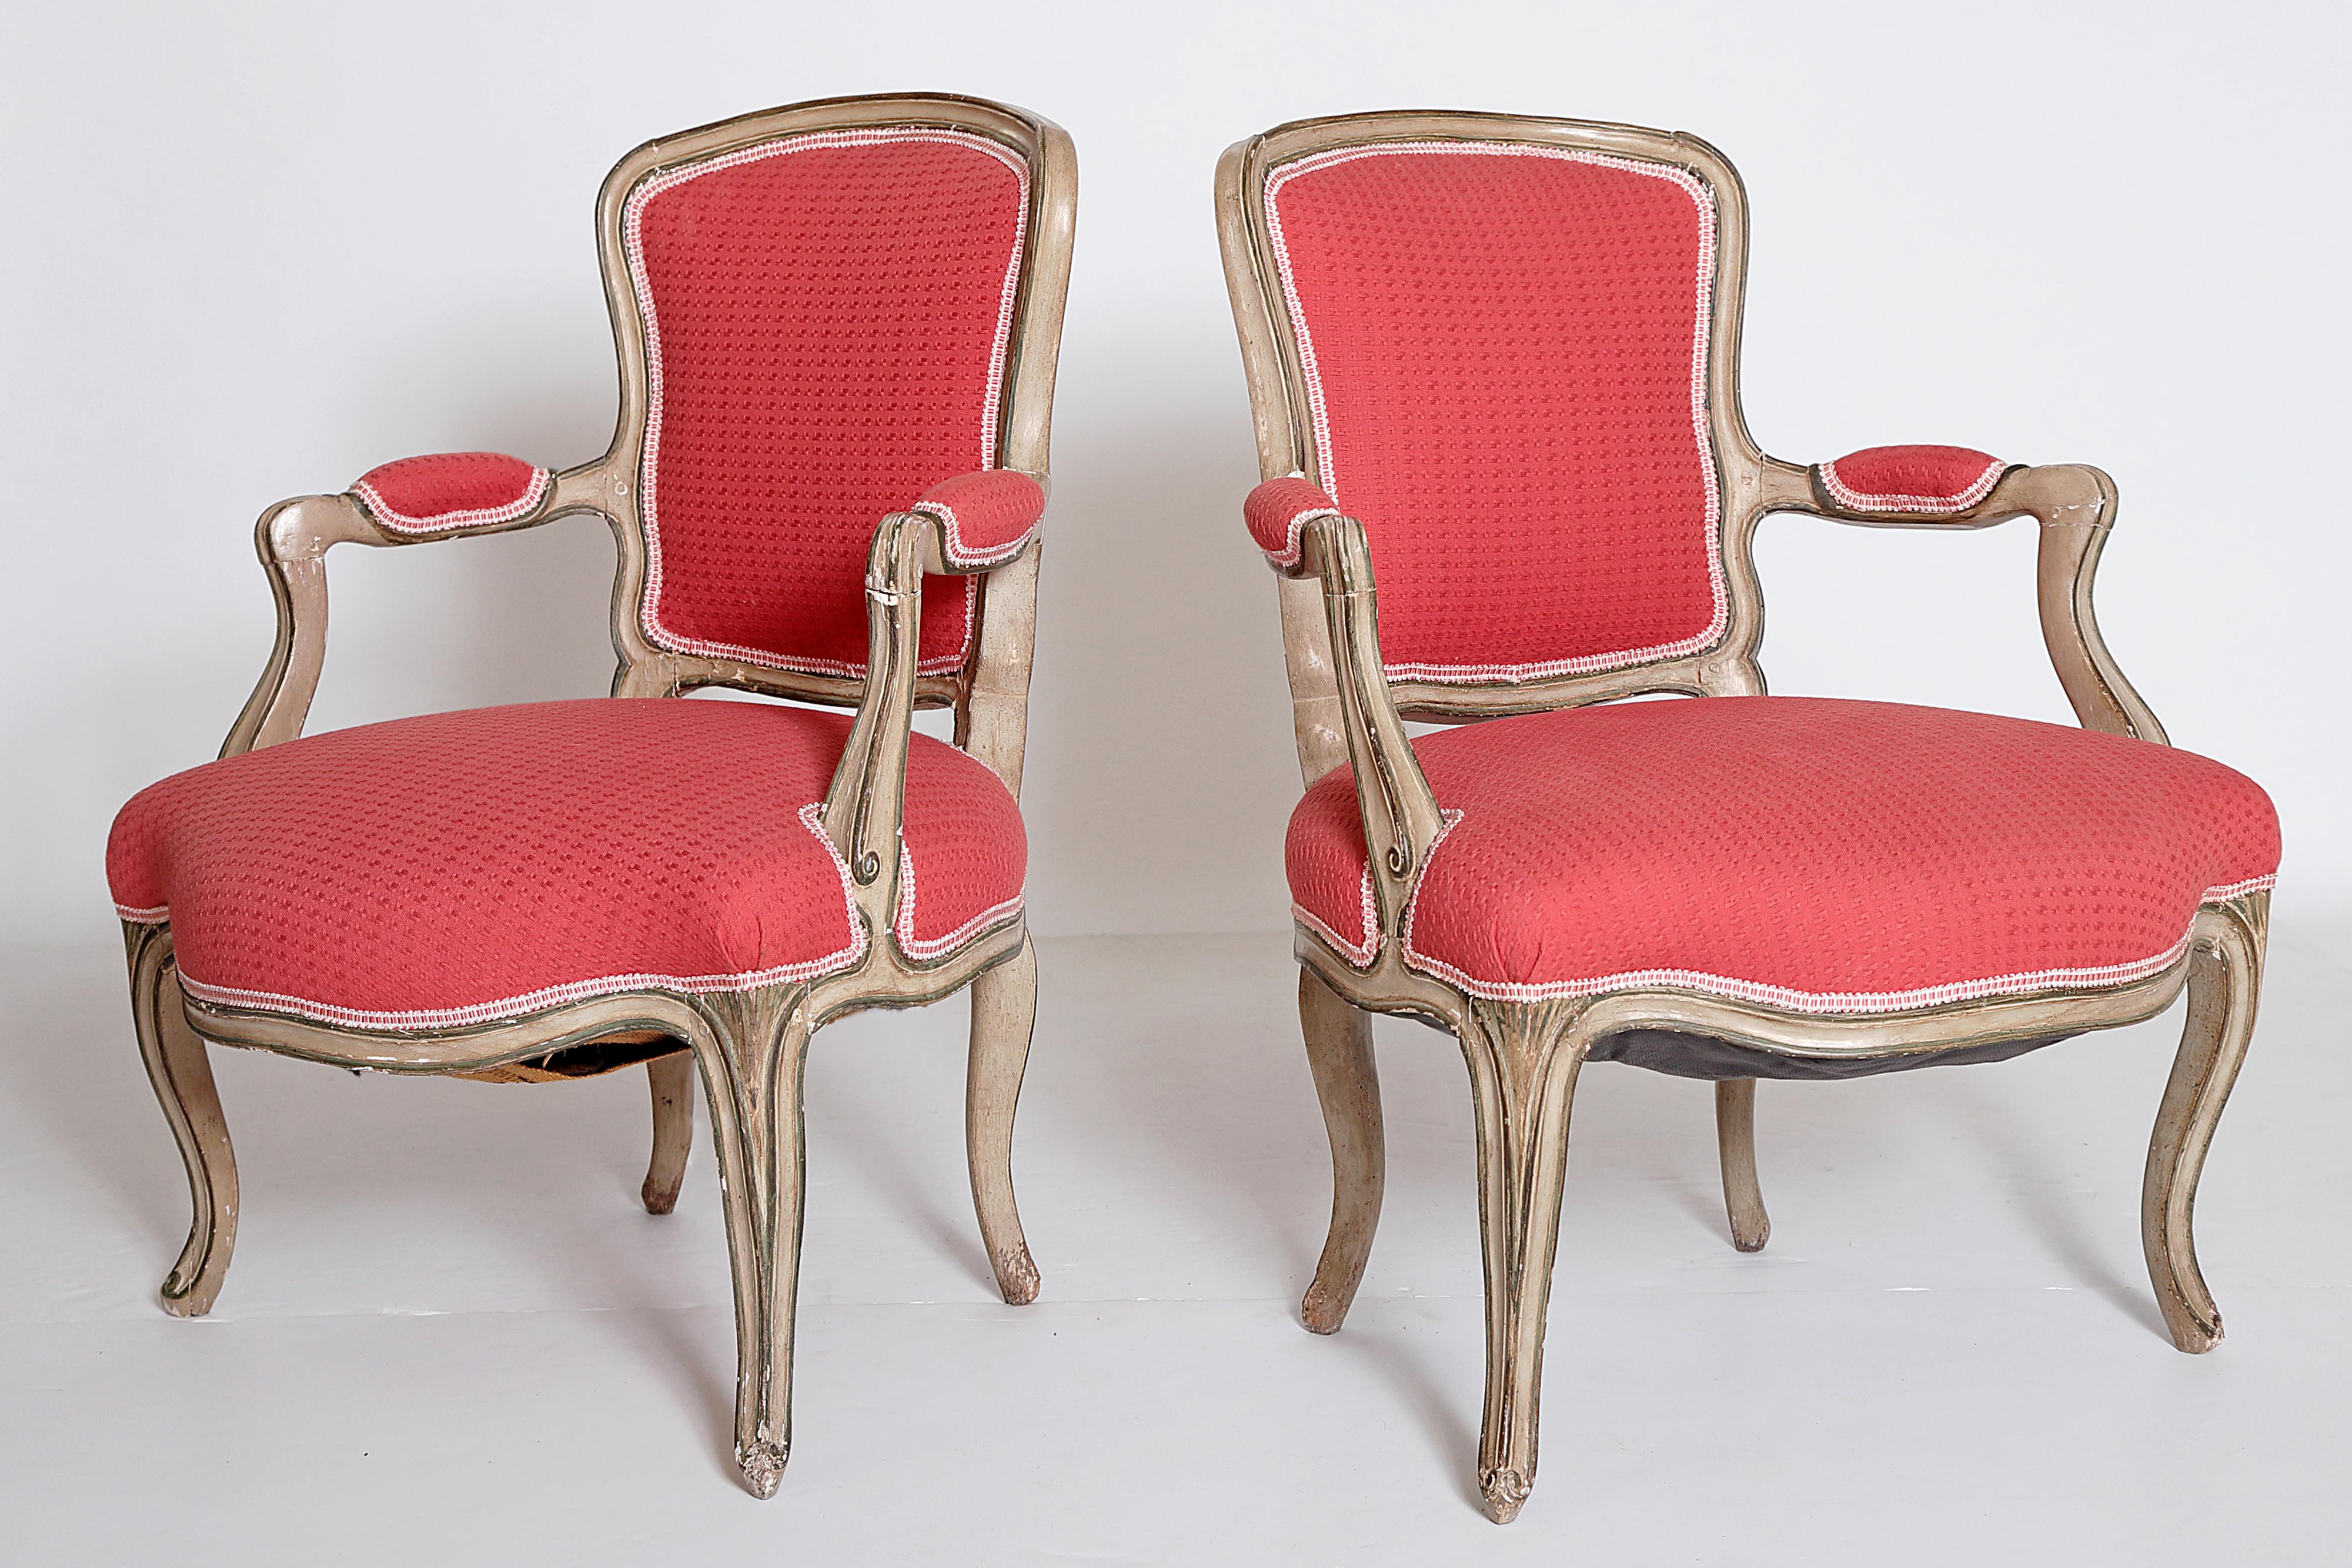 a pair of Louis XV fauteuils / open armchairs grayish-green painted frame, carved details picked out in a darker hue, textured woven coral / watermelon upholstery with lighter color trim, France, 18th century

the chairs are sprung / have springs in